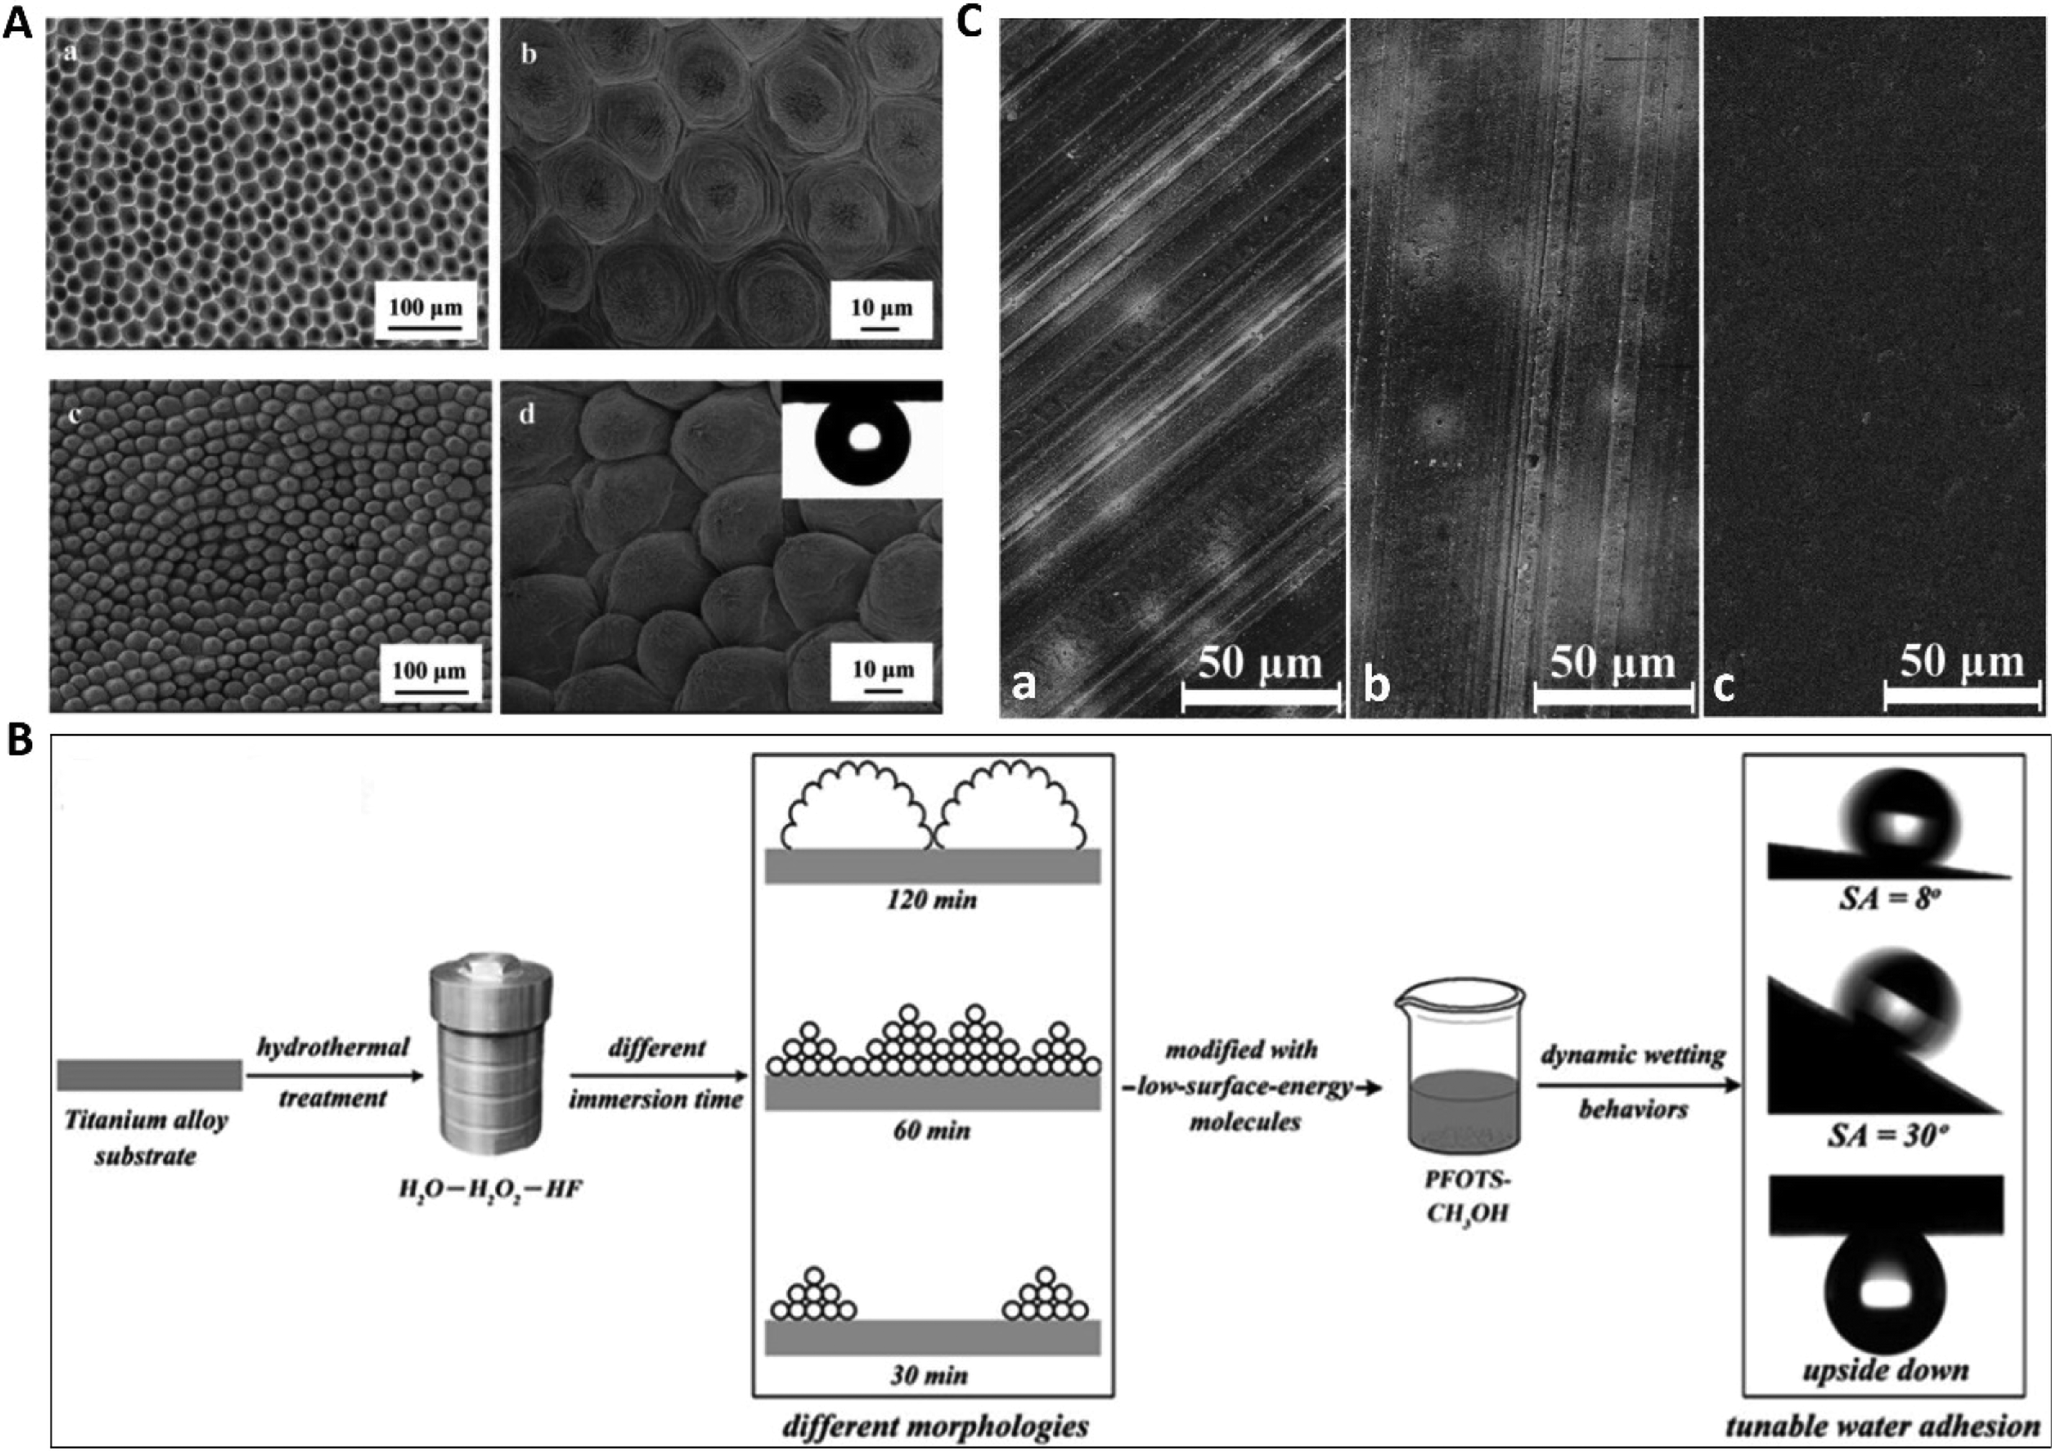 Adhesion behaviors on four special wettable surfaces: natural sources,  mechanisms, fabrications and applications - Soft Matter (RSC Publishing)  DOI:10.1039/D1SM00248A